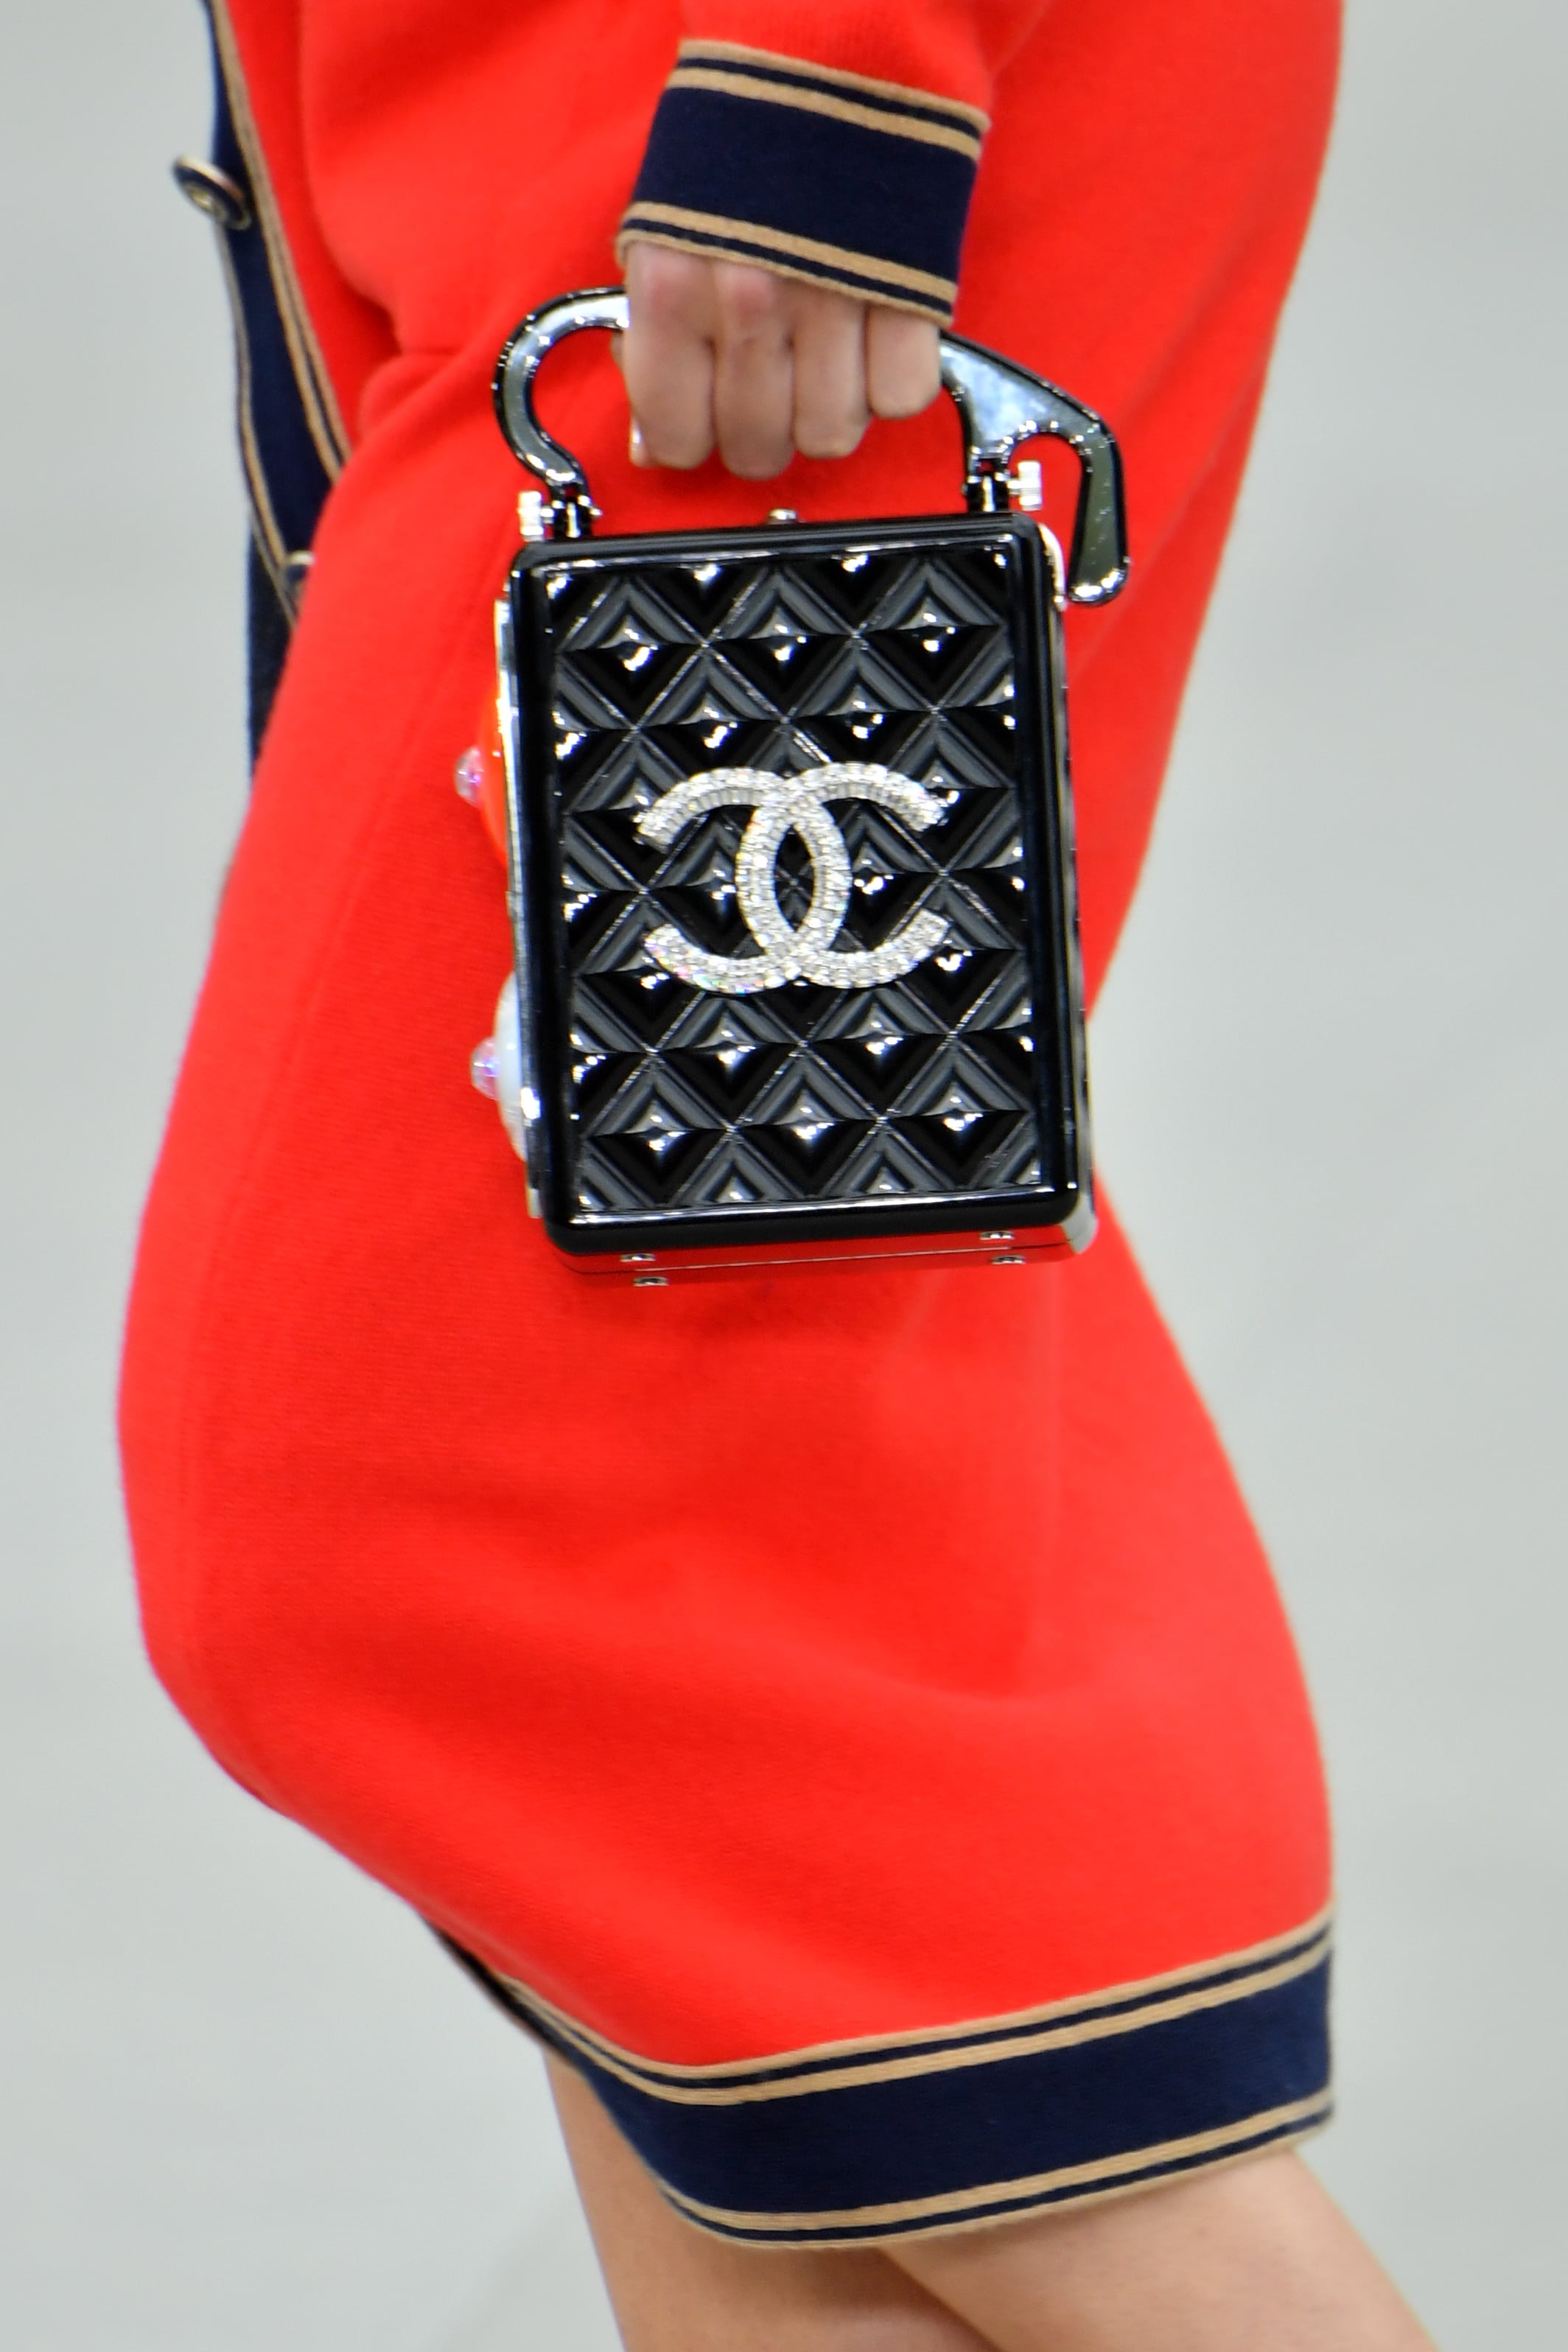 chanel 2020 cruise bags